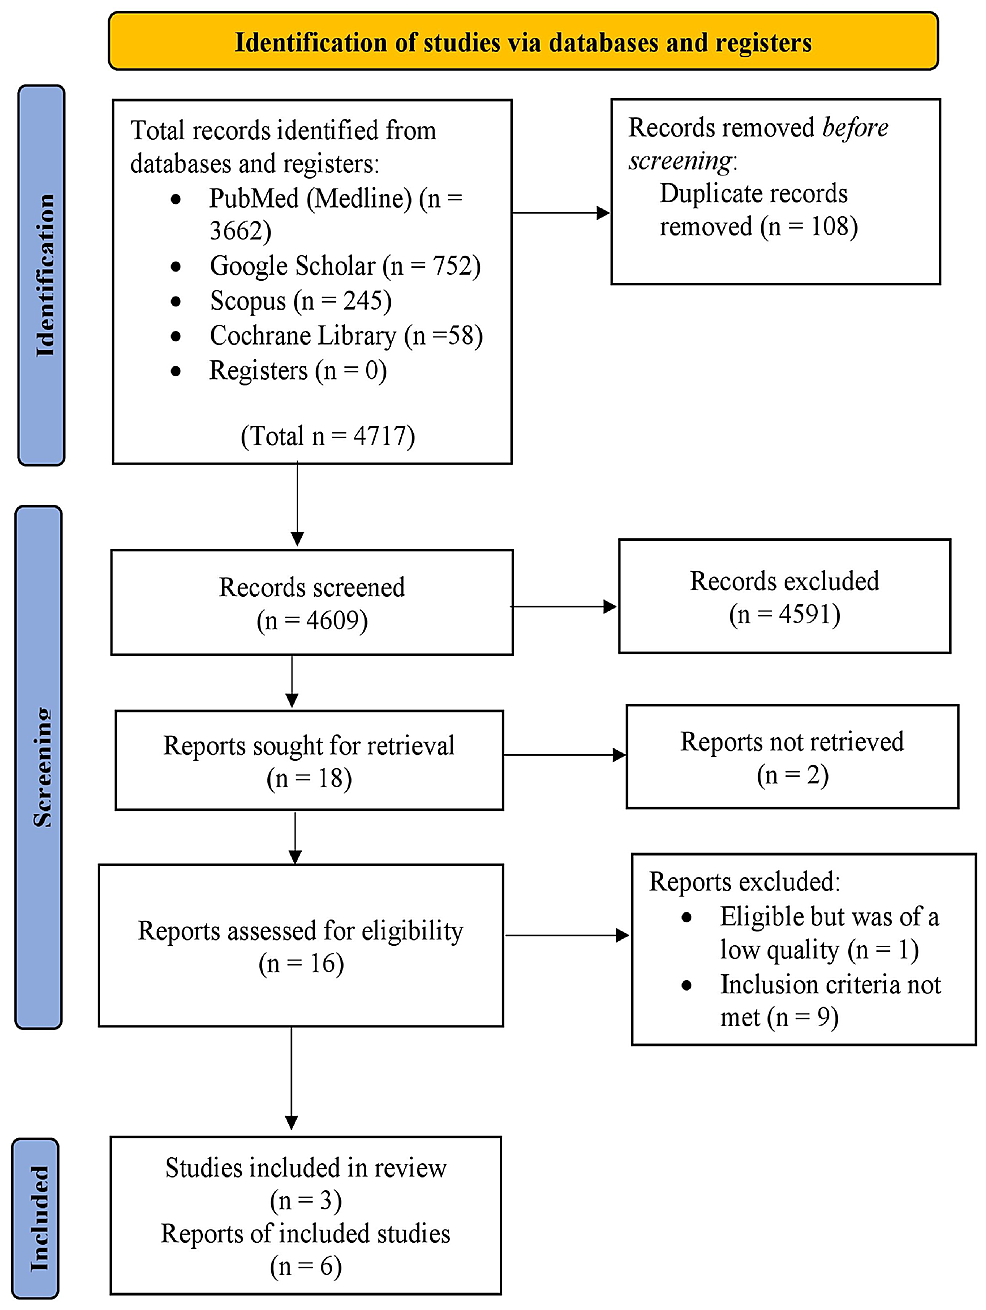 Preferred-Reporting-Items-for-Systematic-Reviews-and-Meta-Analyses-(PRISMA)-flow-diagram.